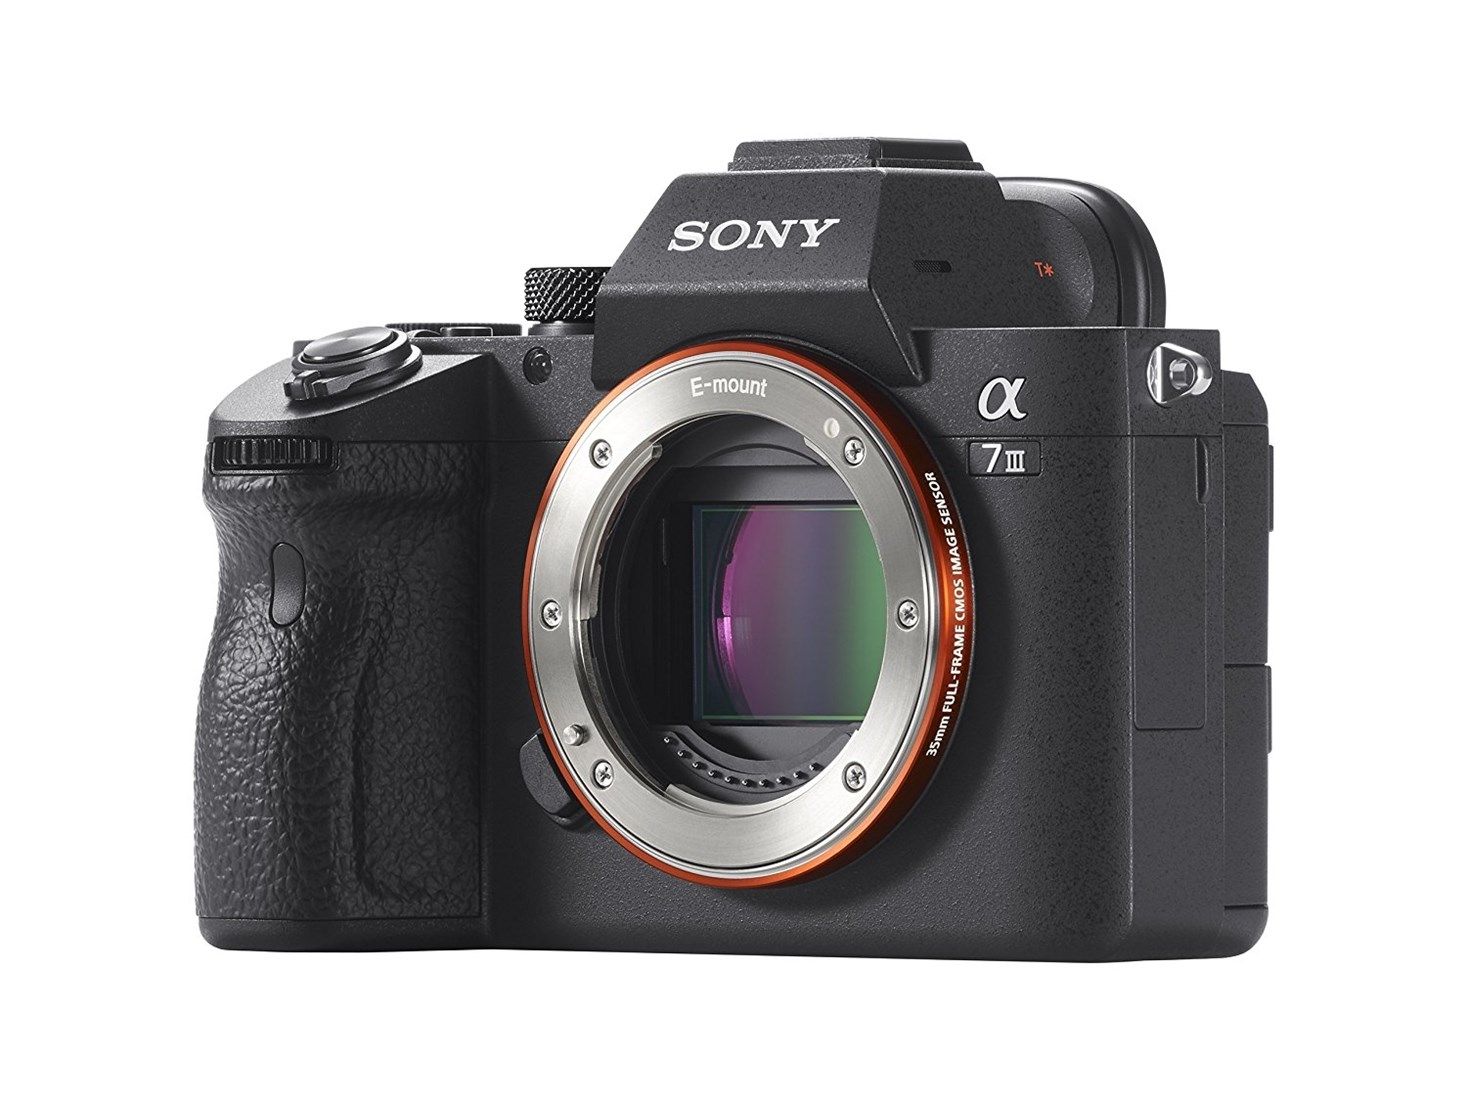 Sony Alpha a7 III Mirrorless Camera - Body only - Product Photo 7 - Side profile of the camera body with the internal components visible